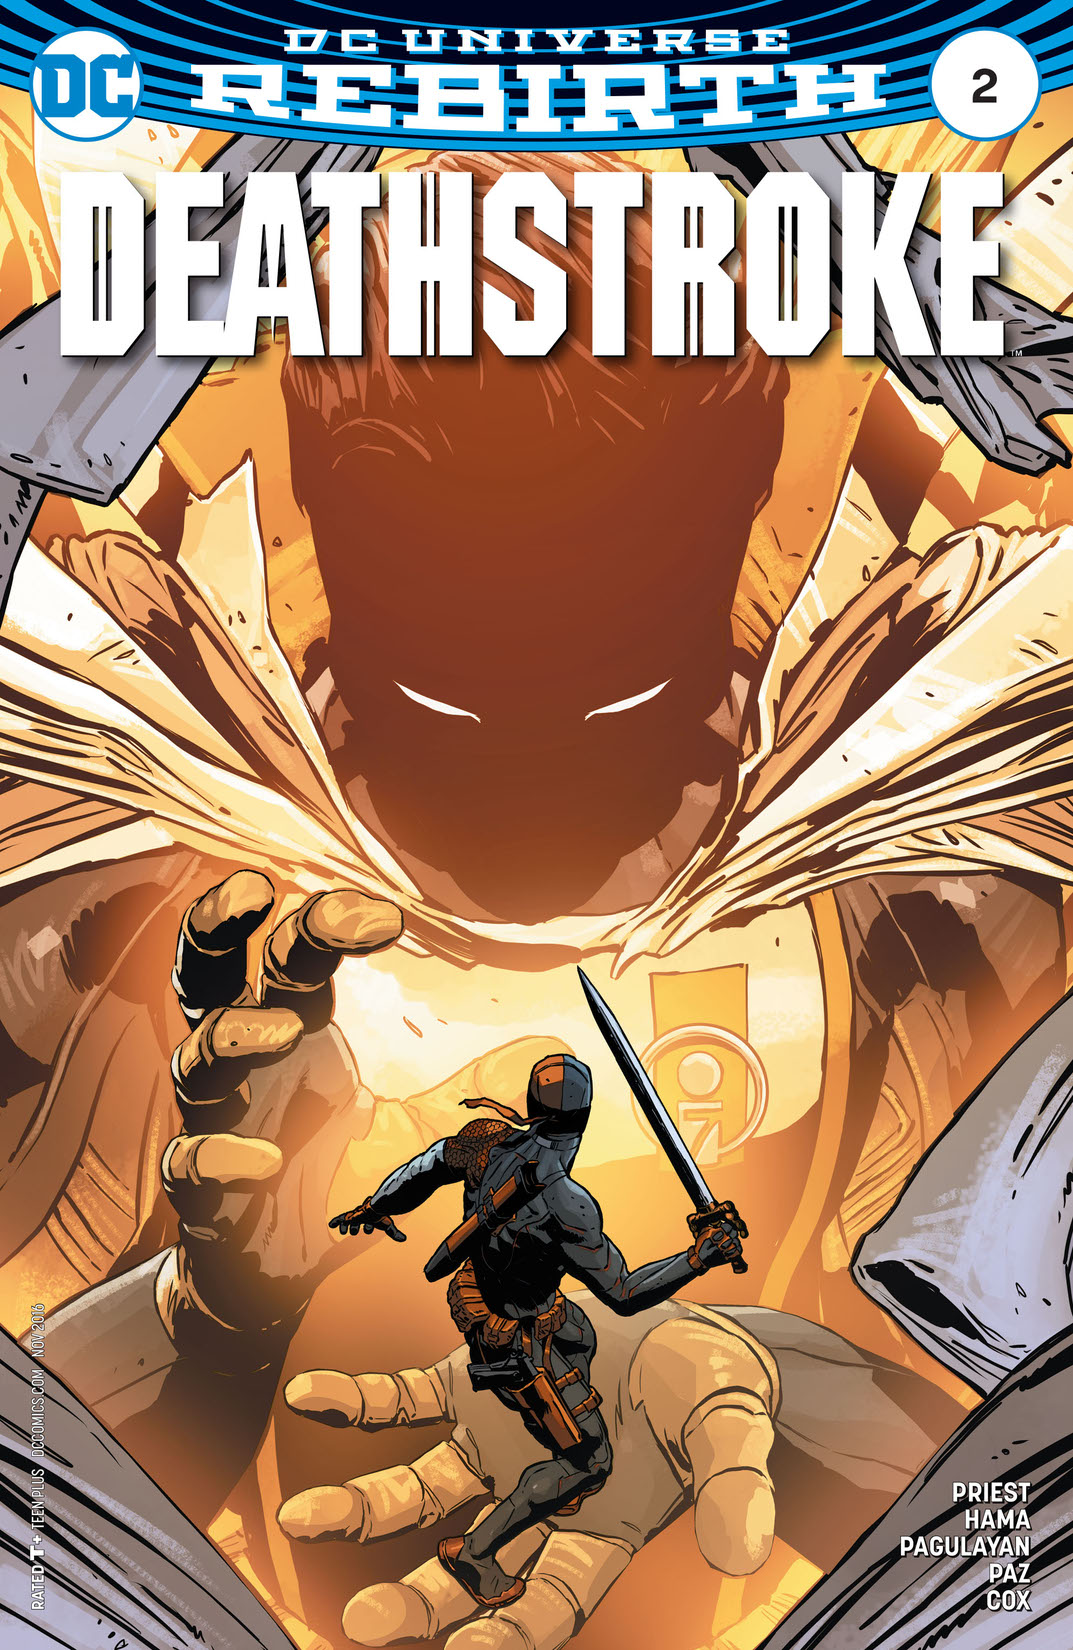 Deathstroke (2016-) #2 preview images